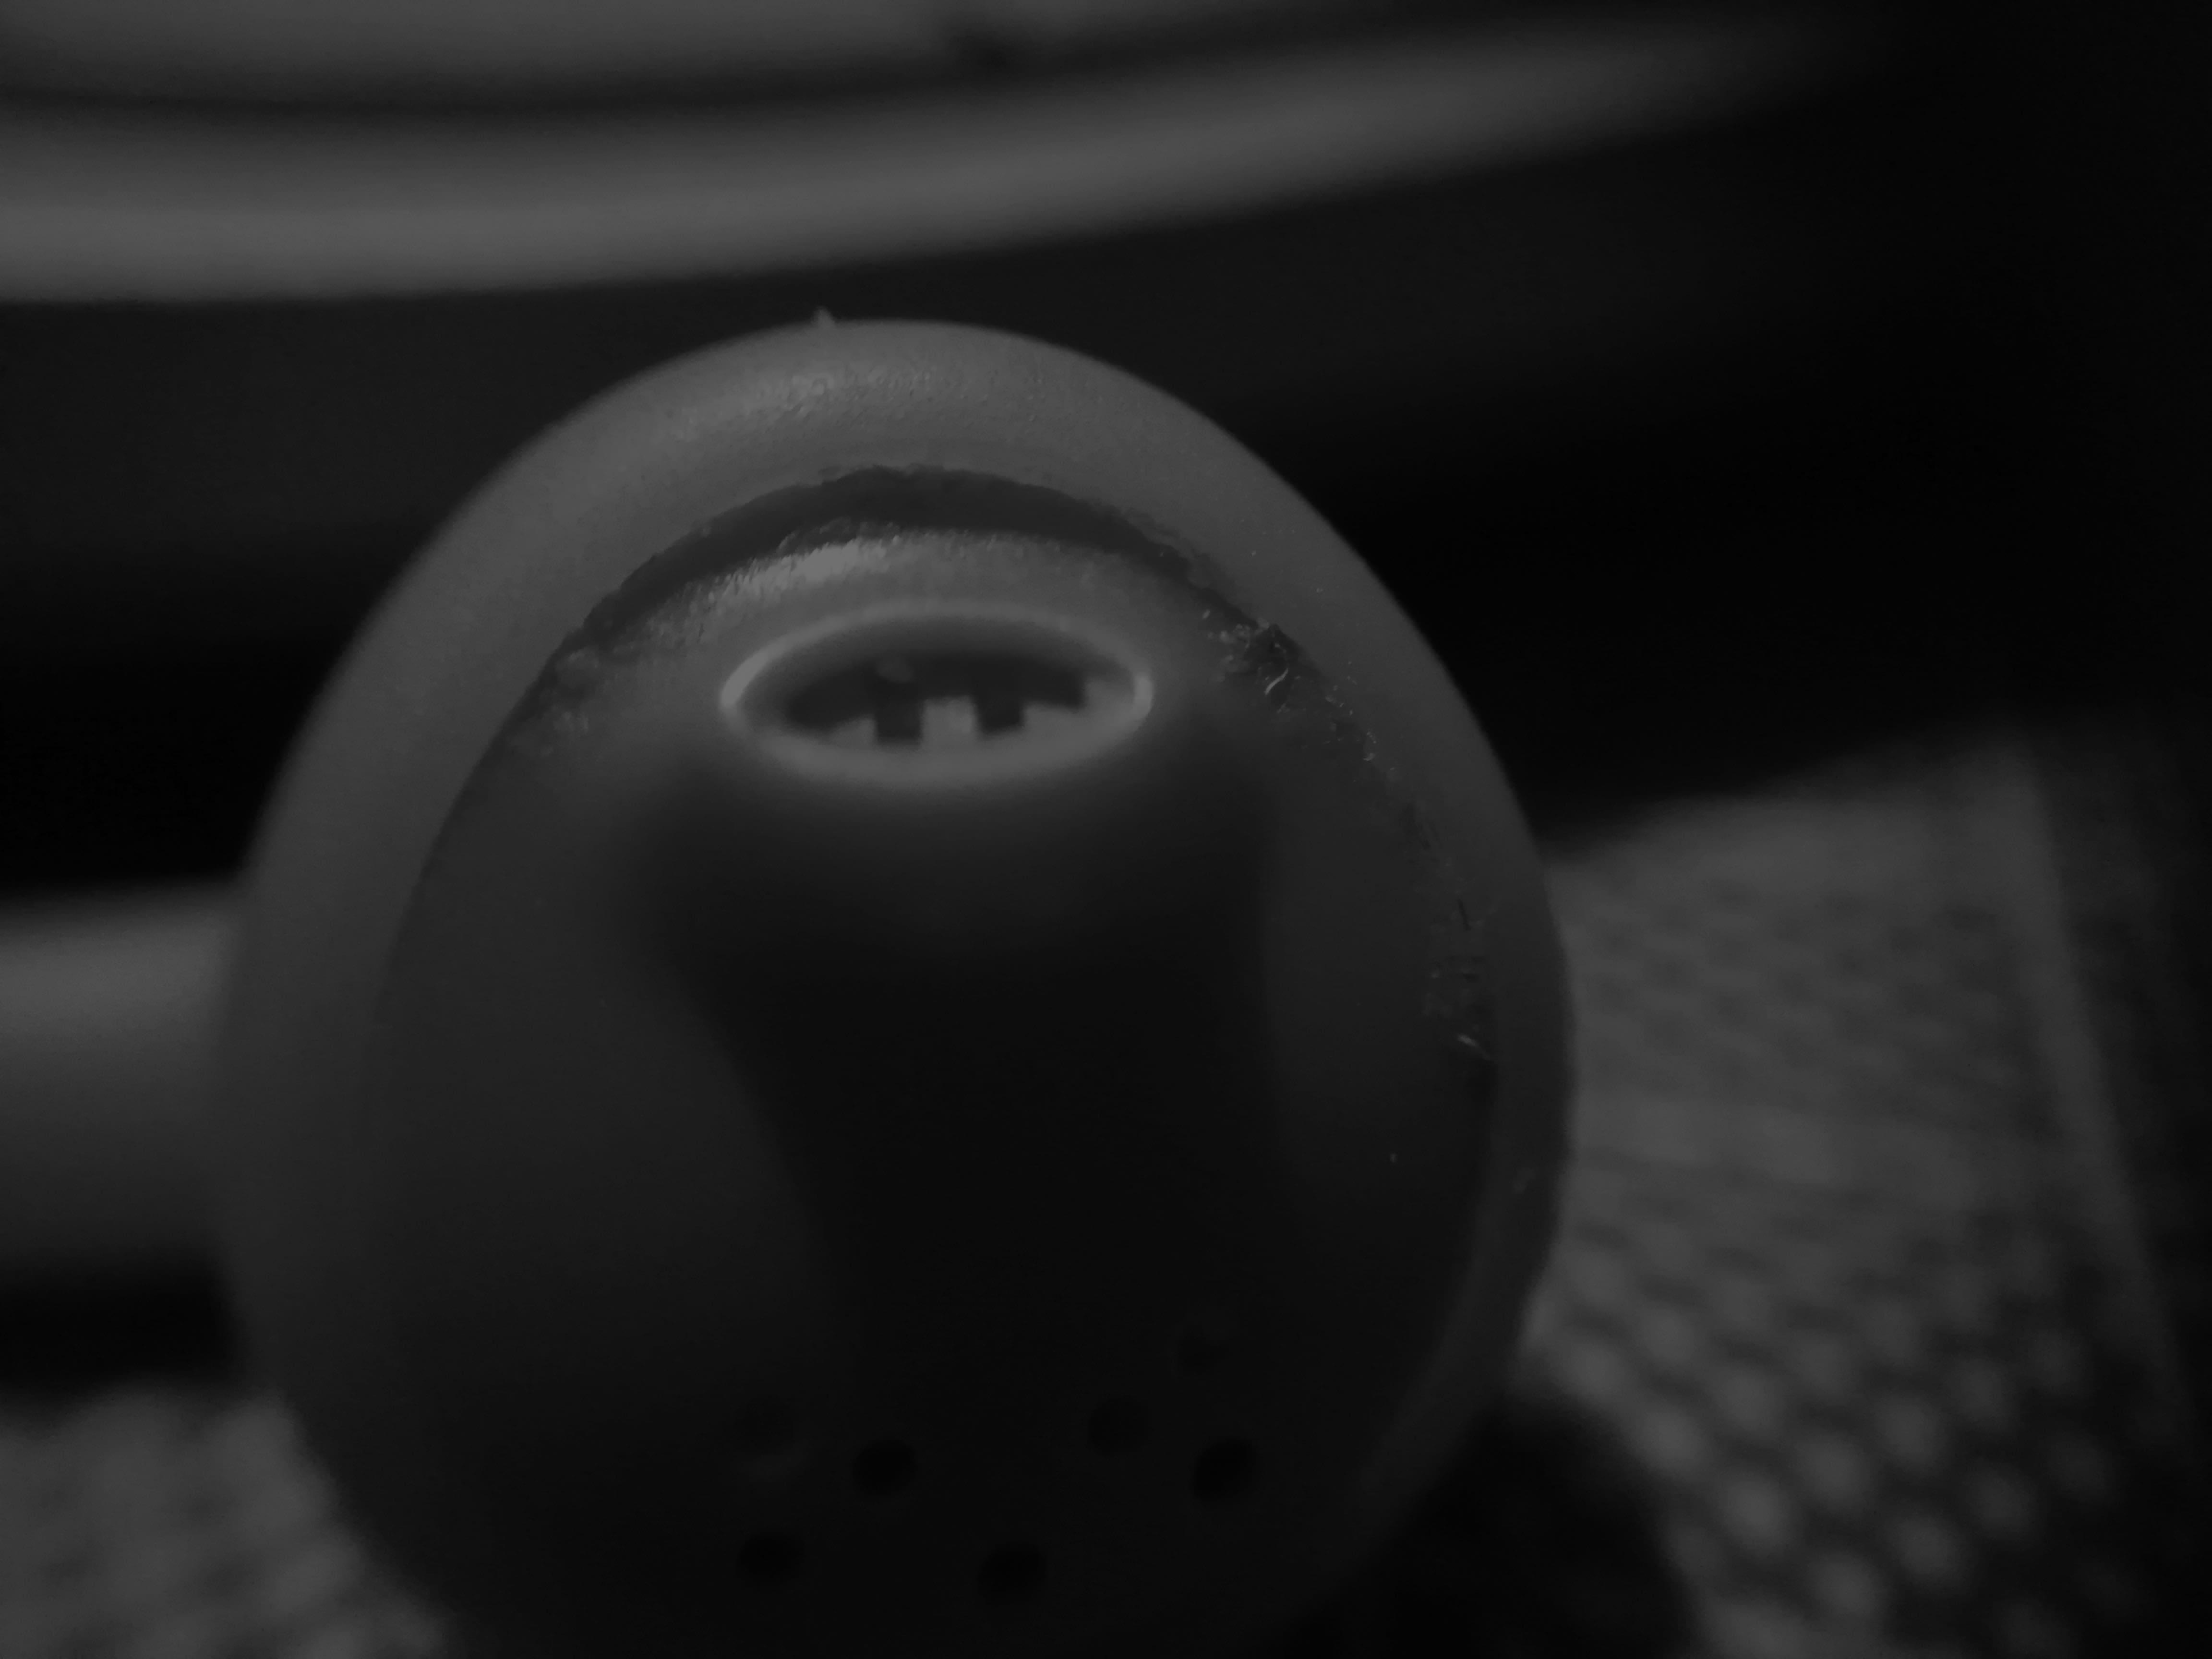 This as a black and white macro shot of an earphone